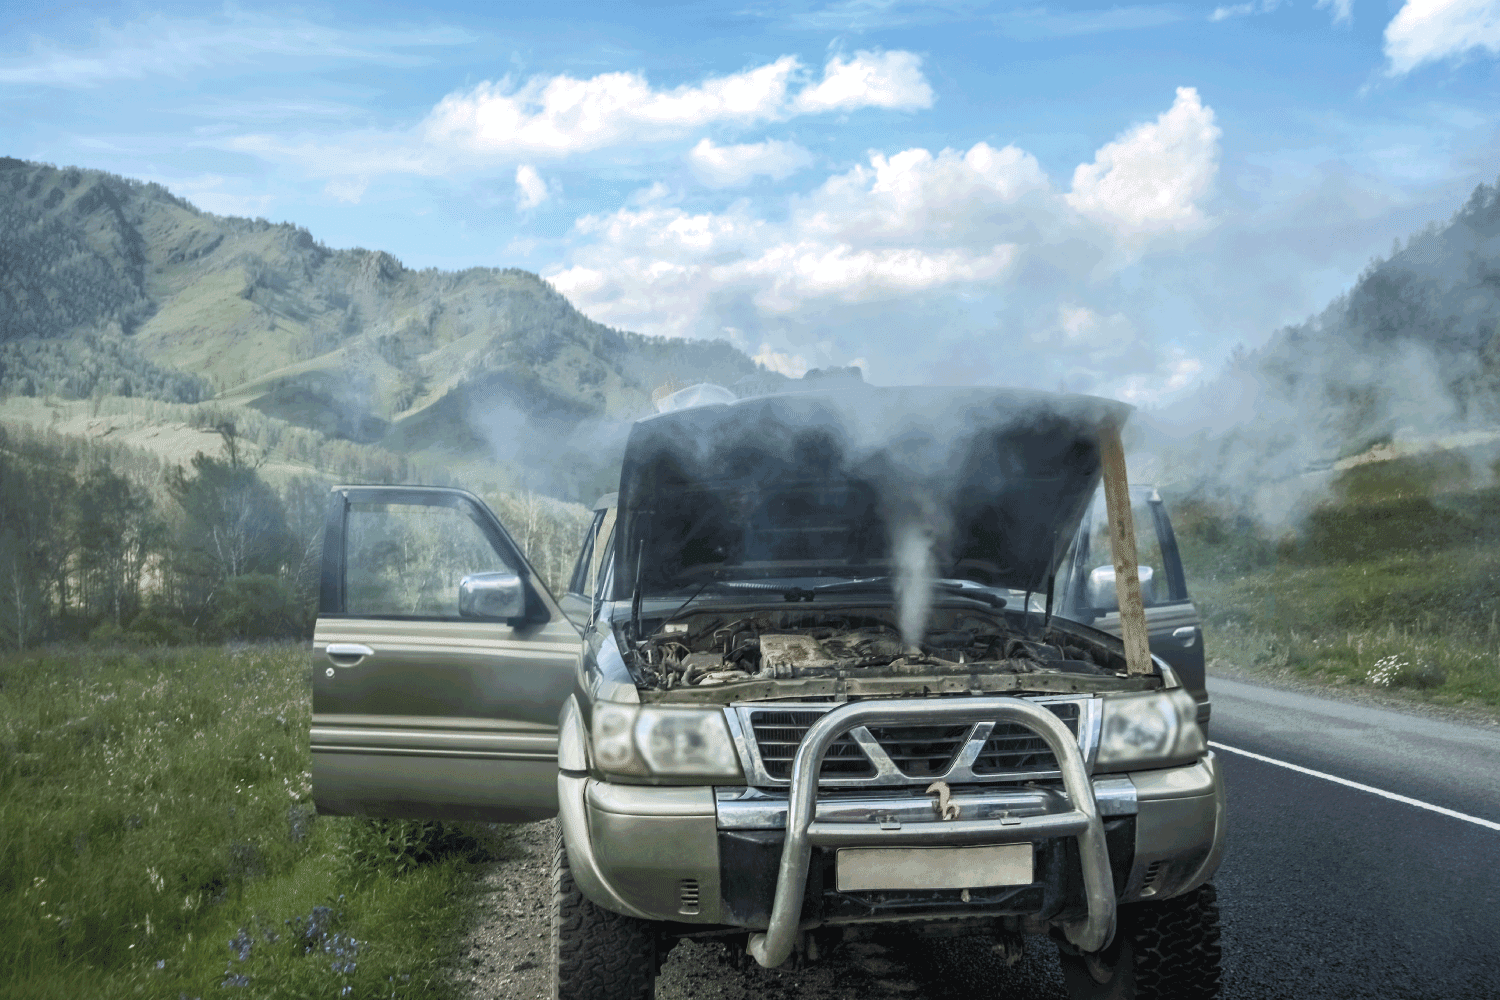 overheated car in the field, bright sunlight, steam under the hood. smoking engine in SUV car. Smoke coming out from overheat engine.